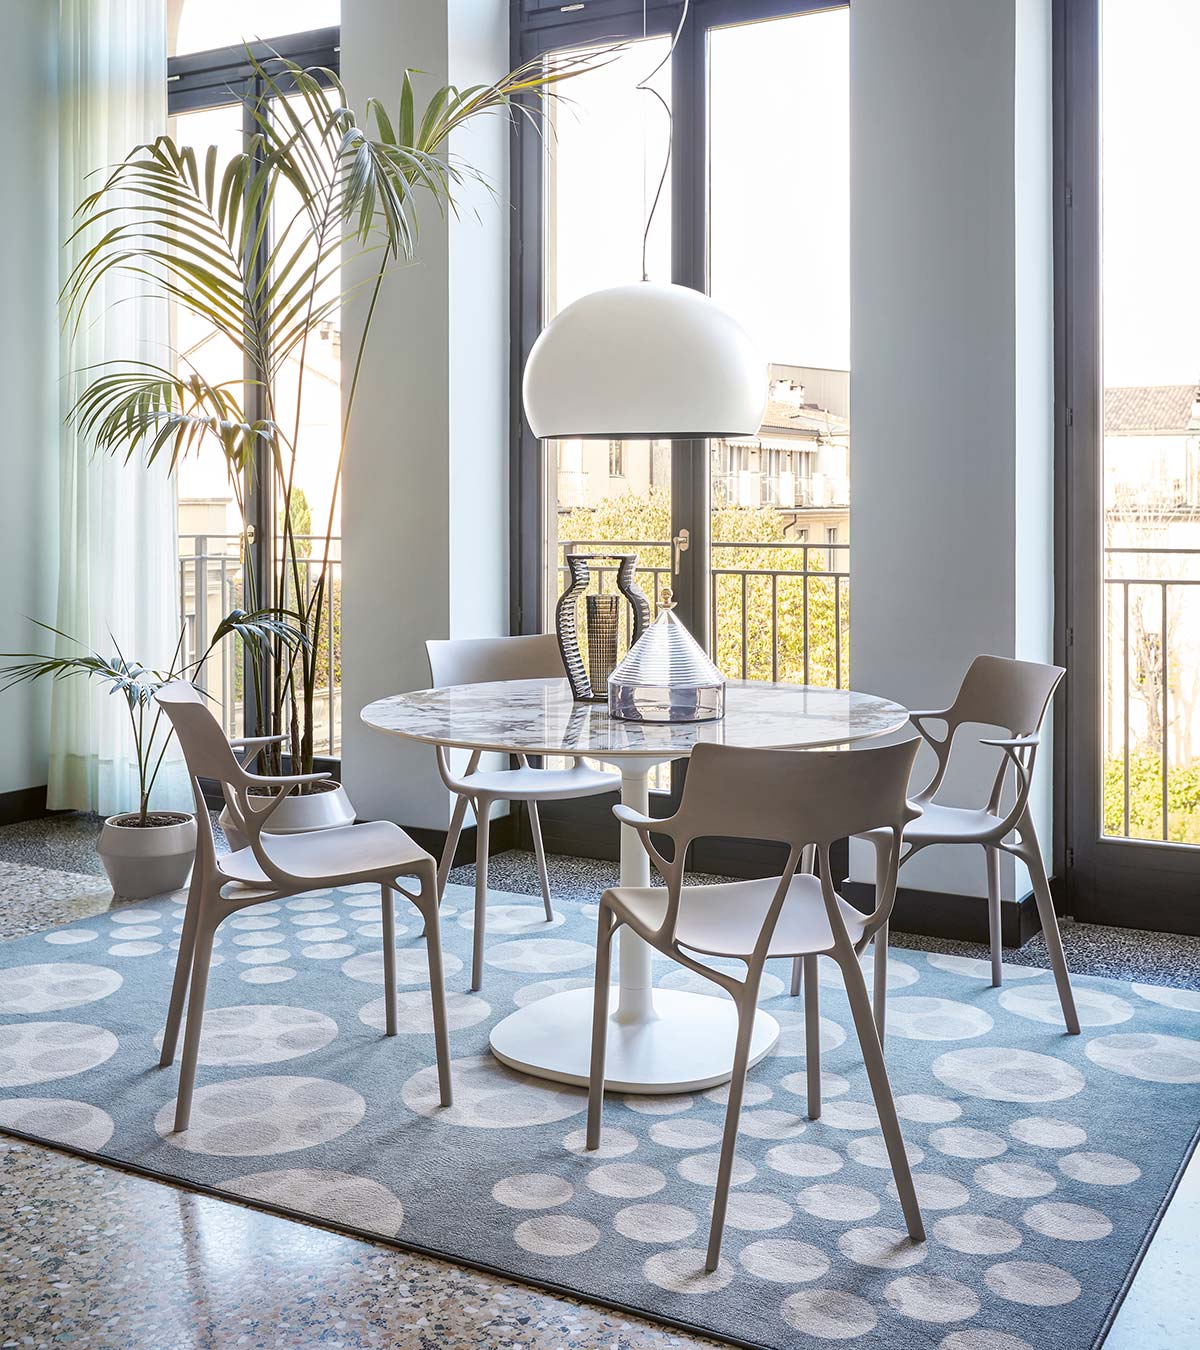 Sedia A.I. design by Philippe Starck, Kartell